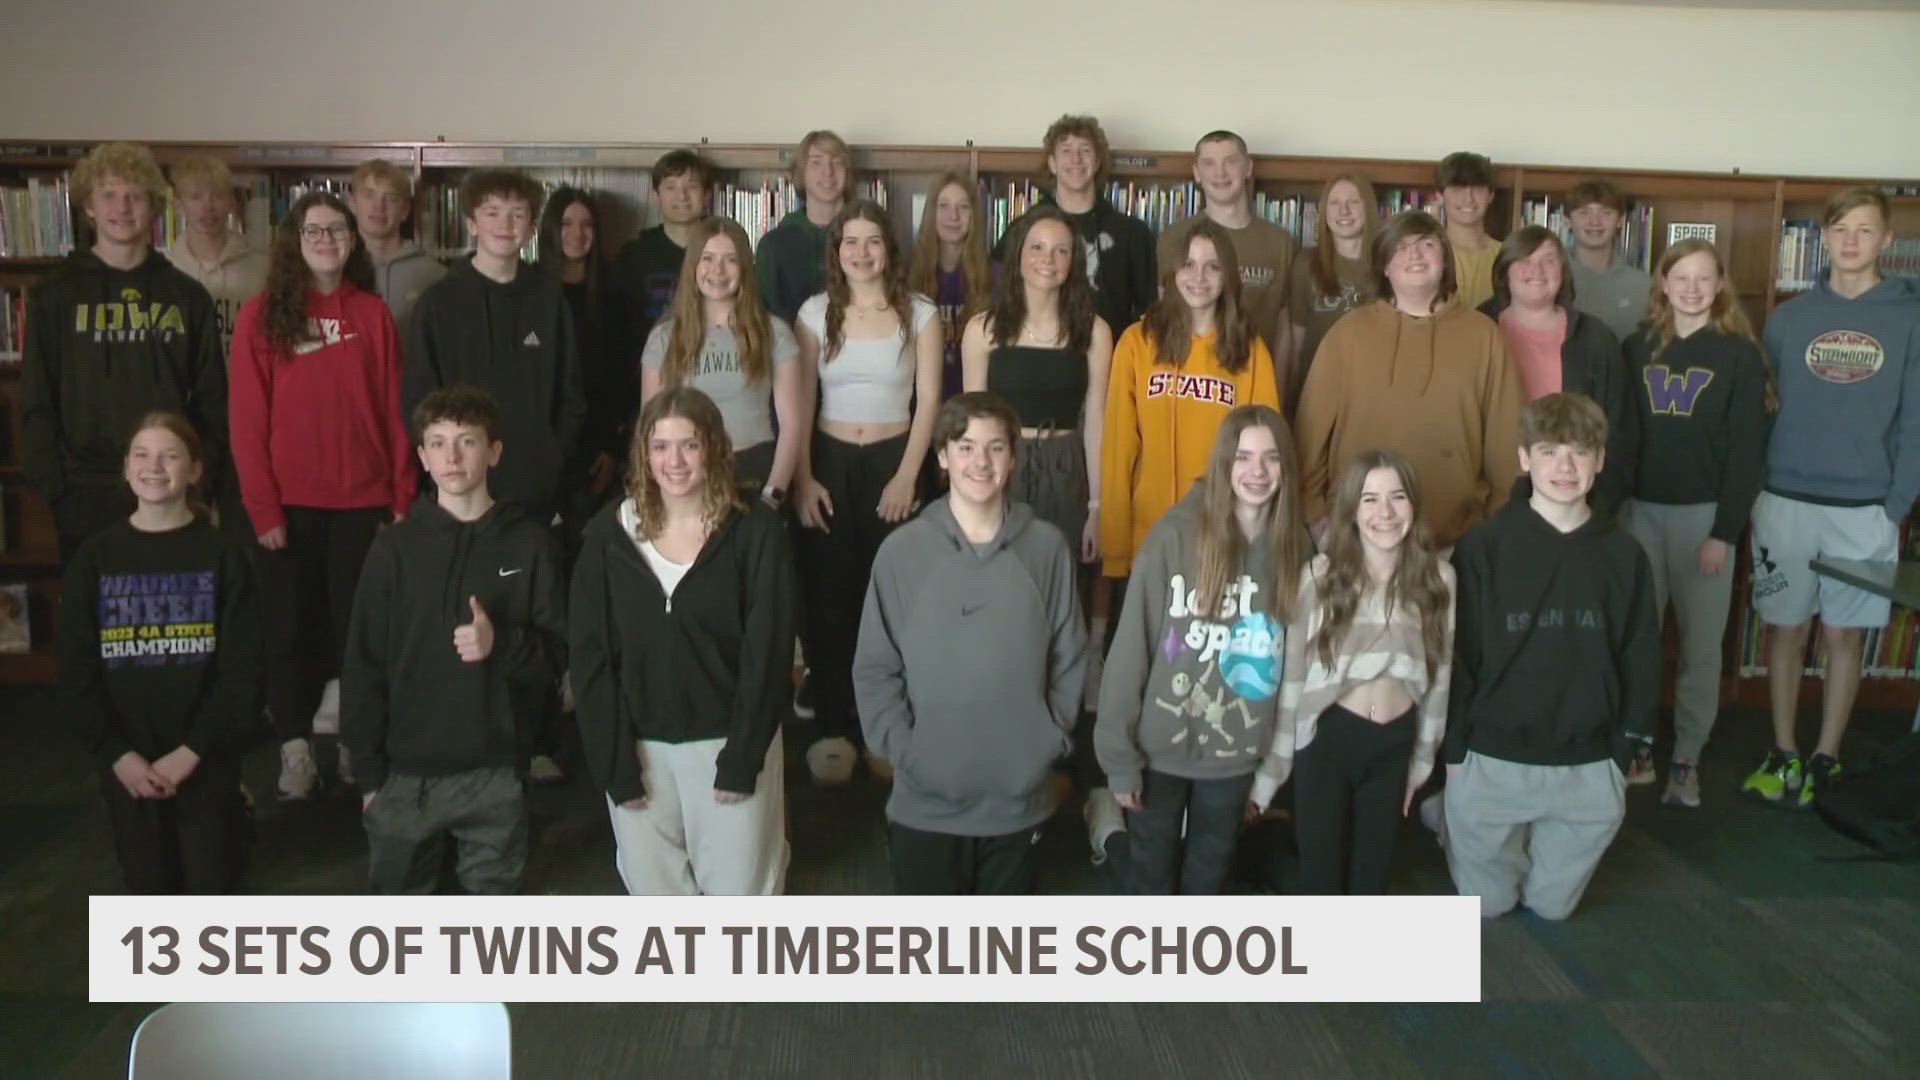 Waukee Timberline School has 13 sets of twins and a set of triplets in the class of 2027